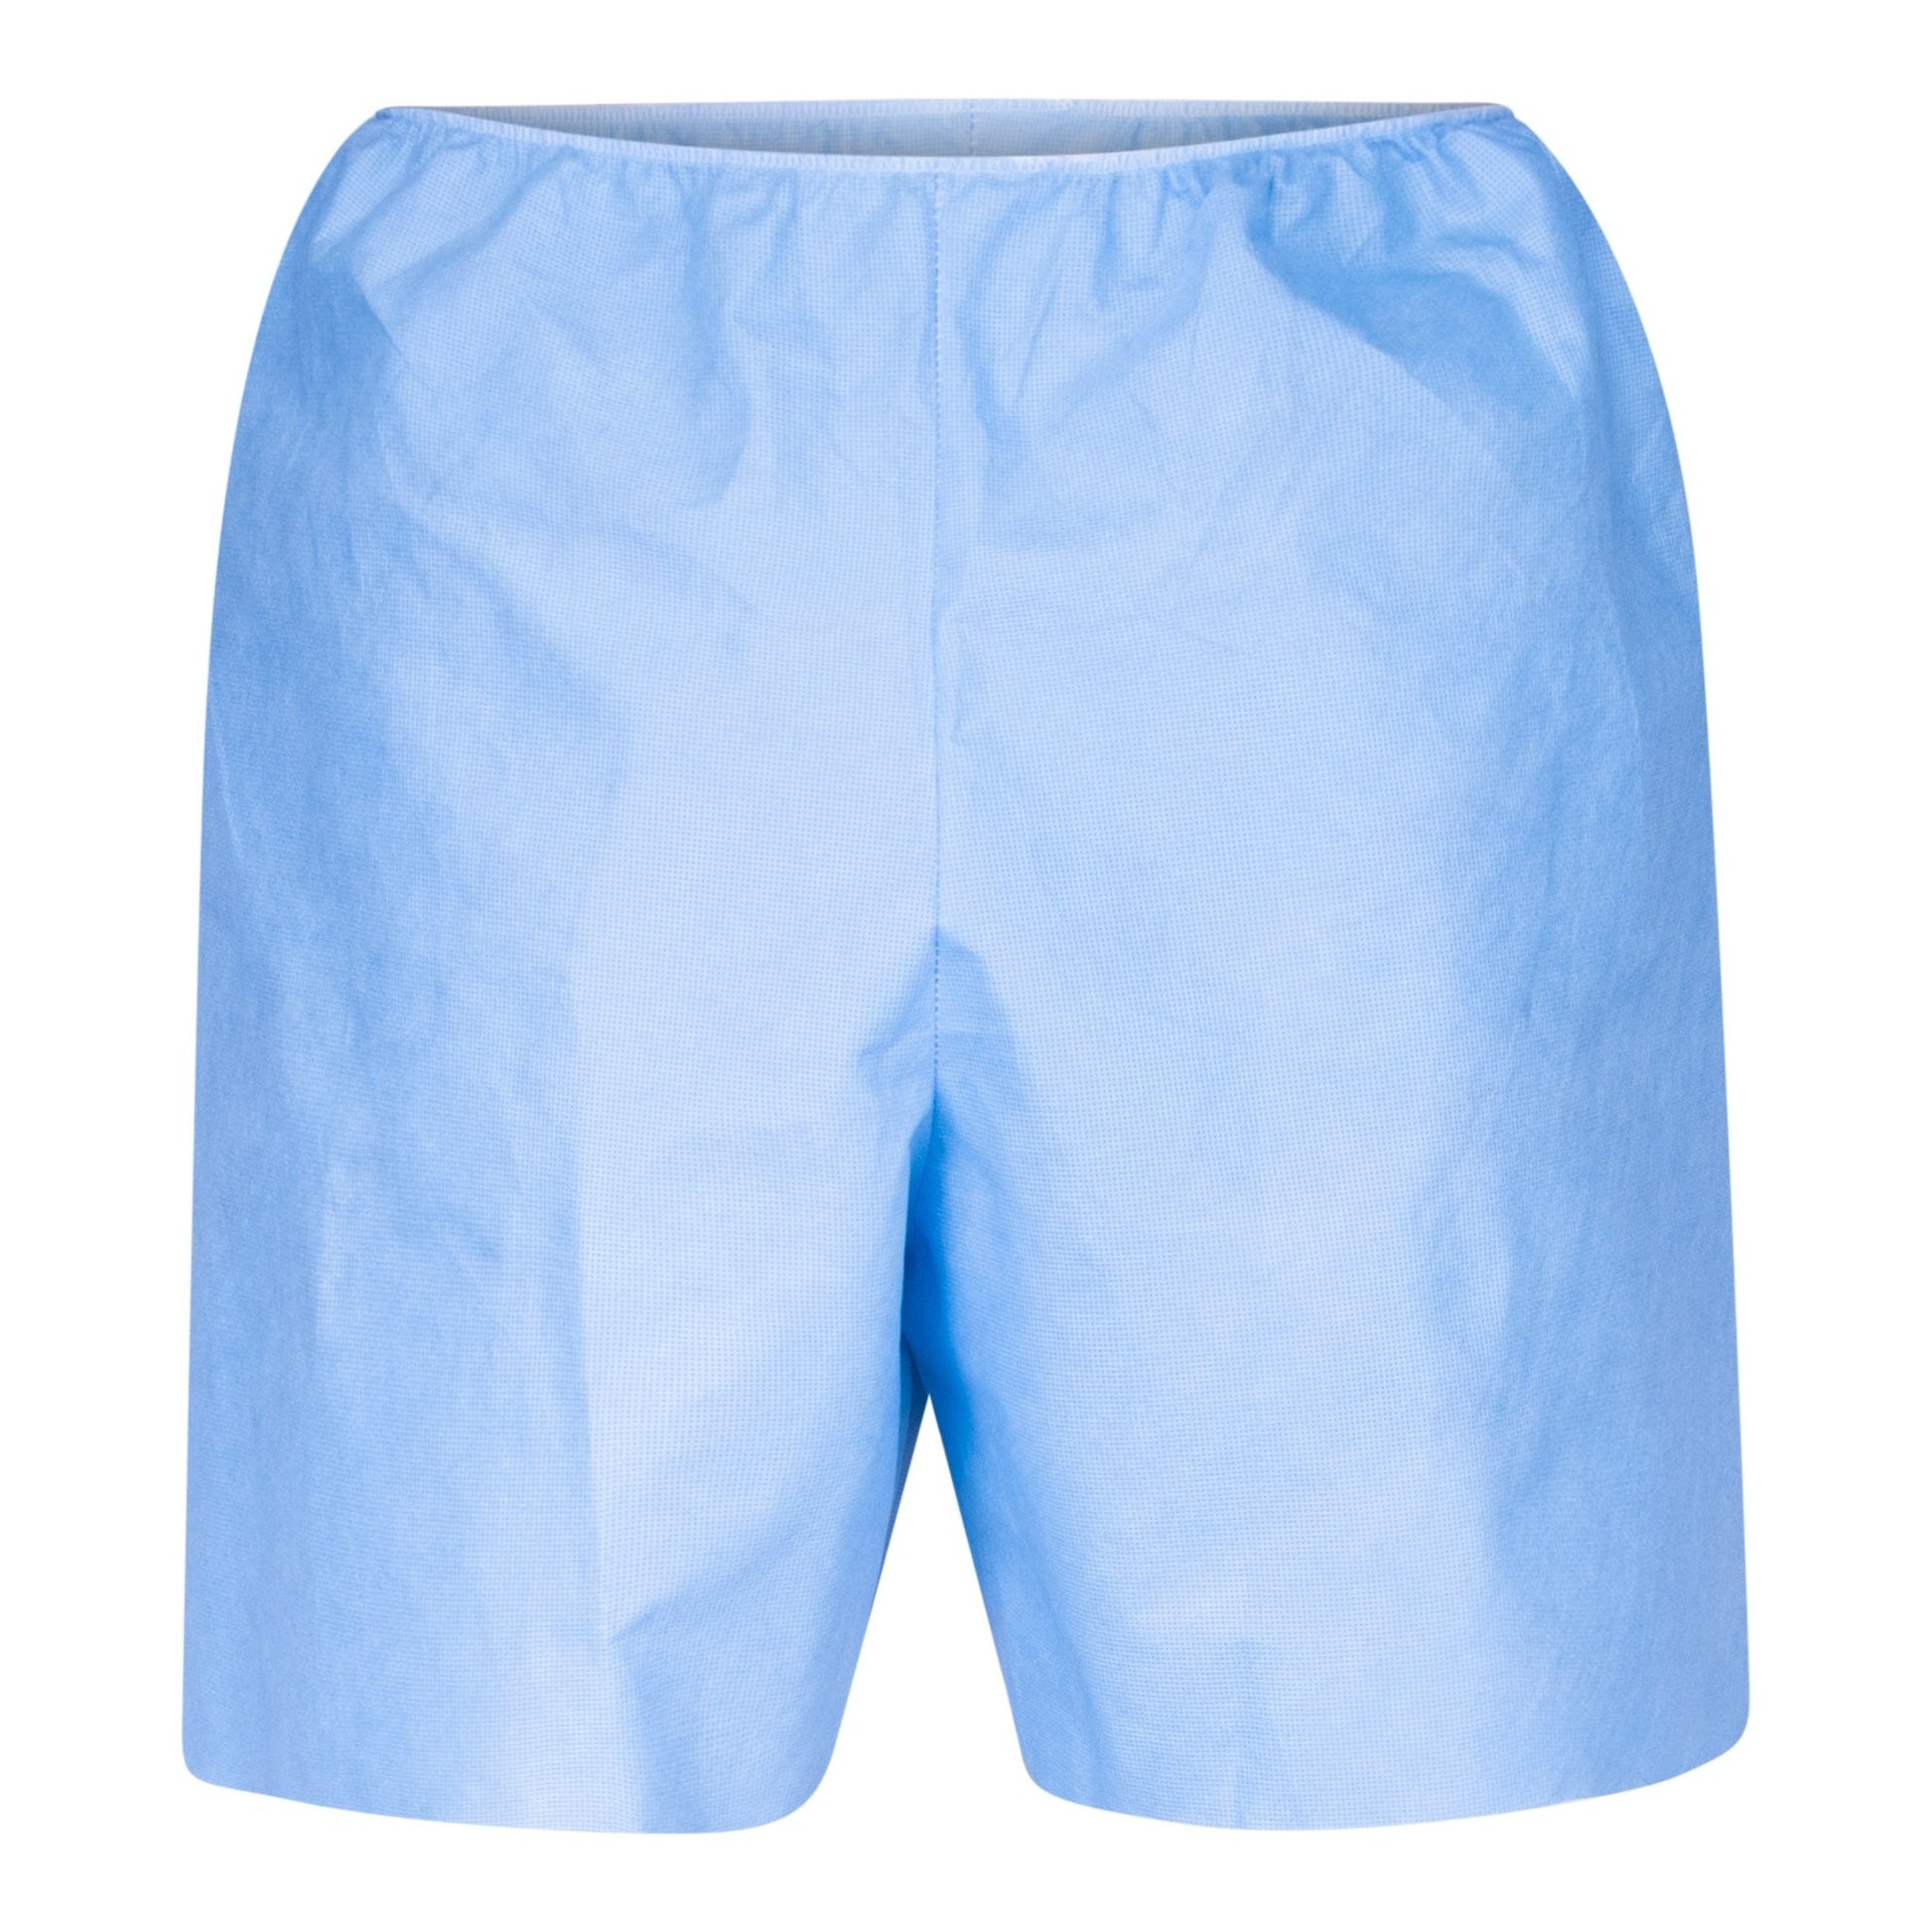 Disposable Exam Shorts - 50 pack - DisposableGowns.com